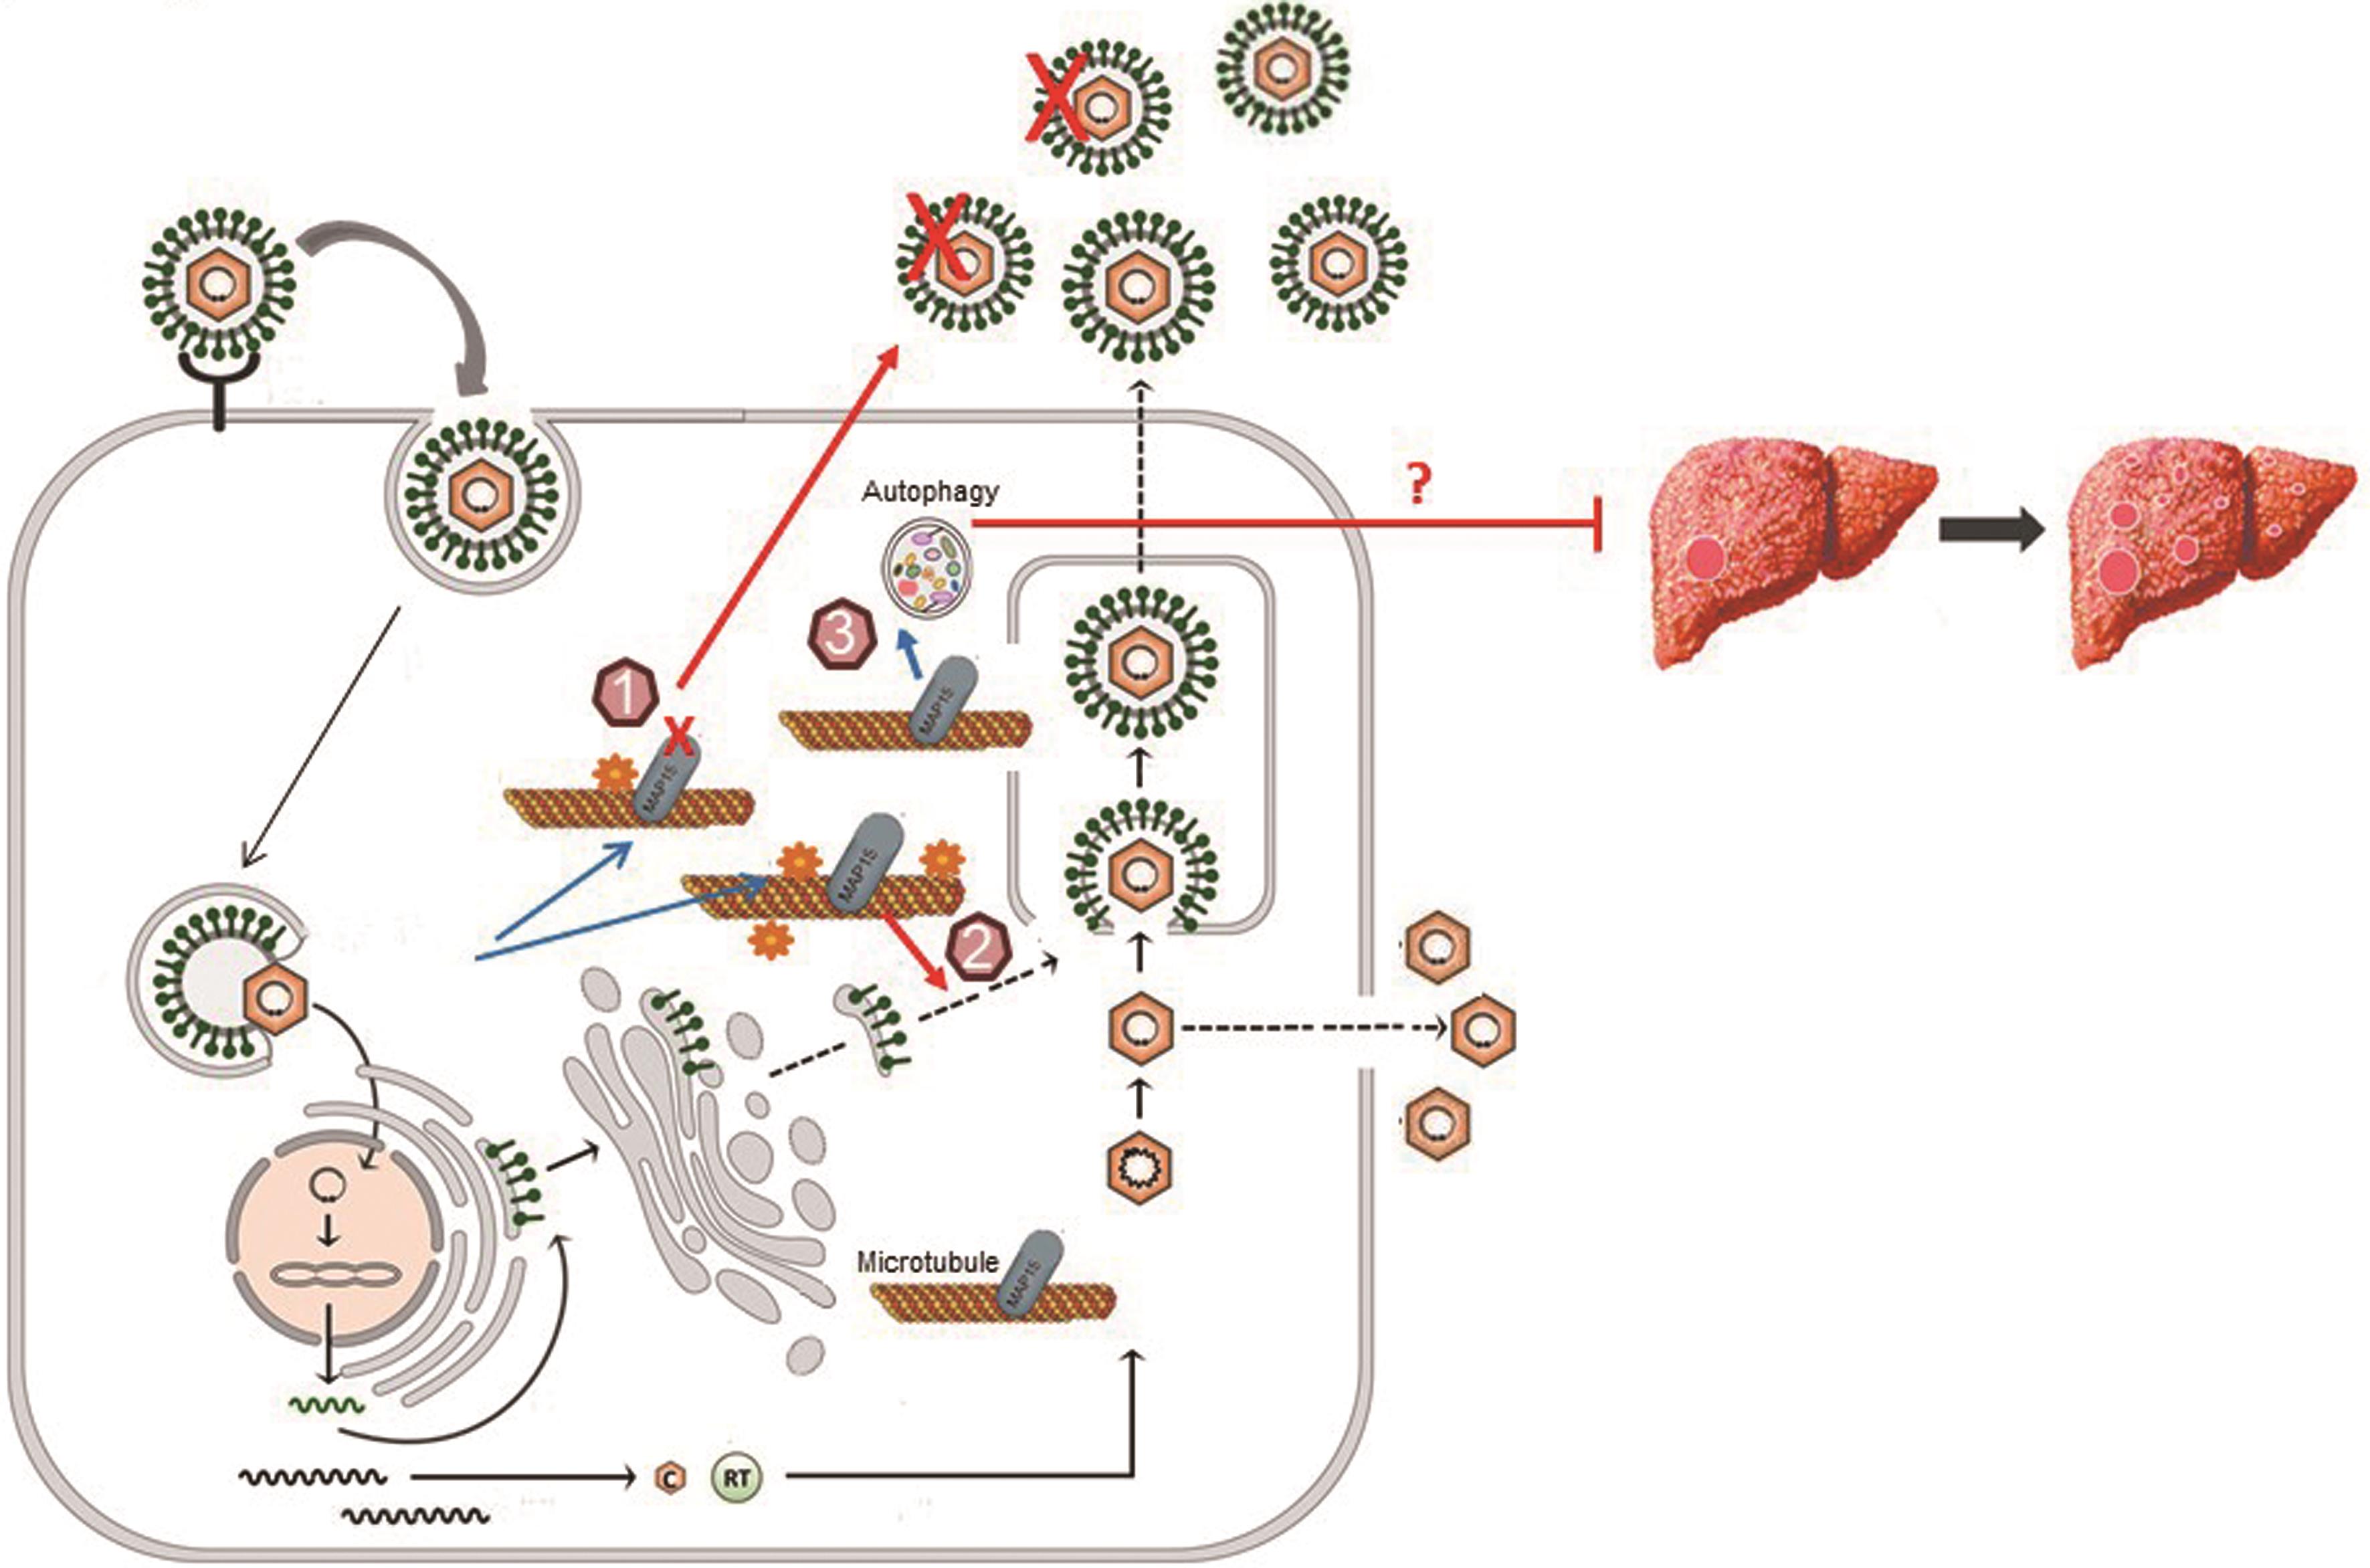 Diagram of novel MT targeted therapeutics in HBV infection.